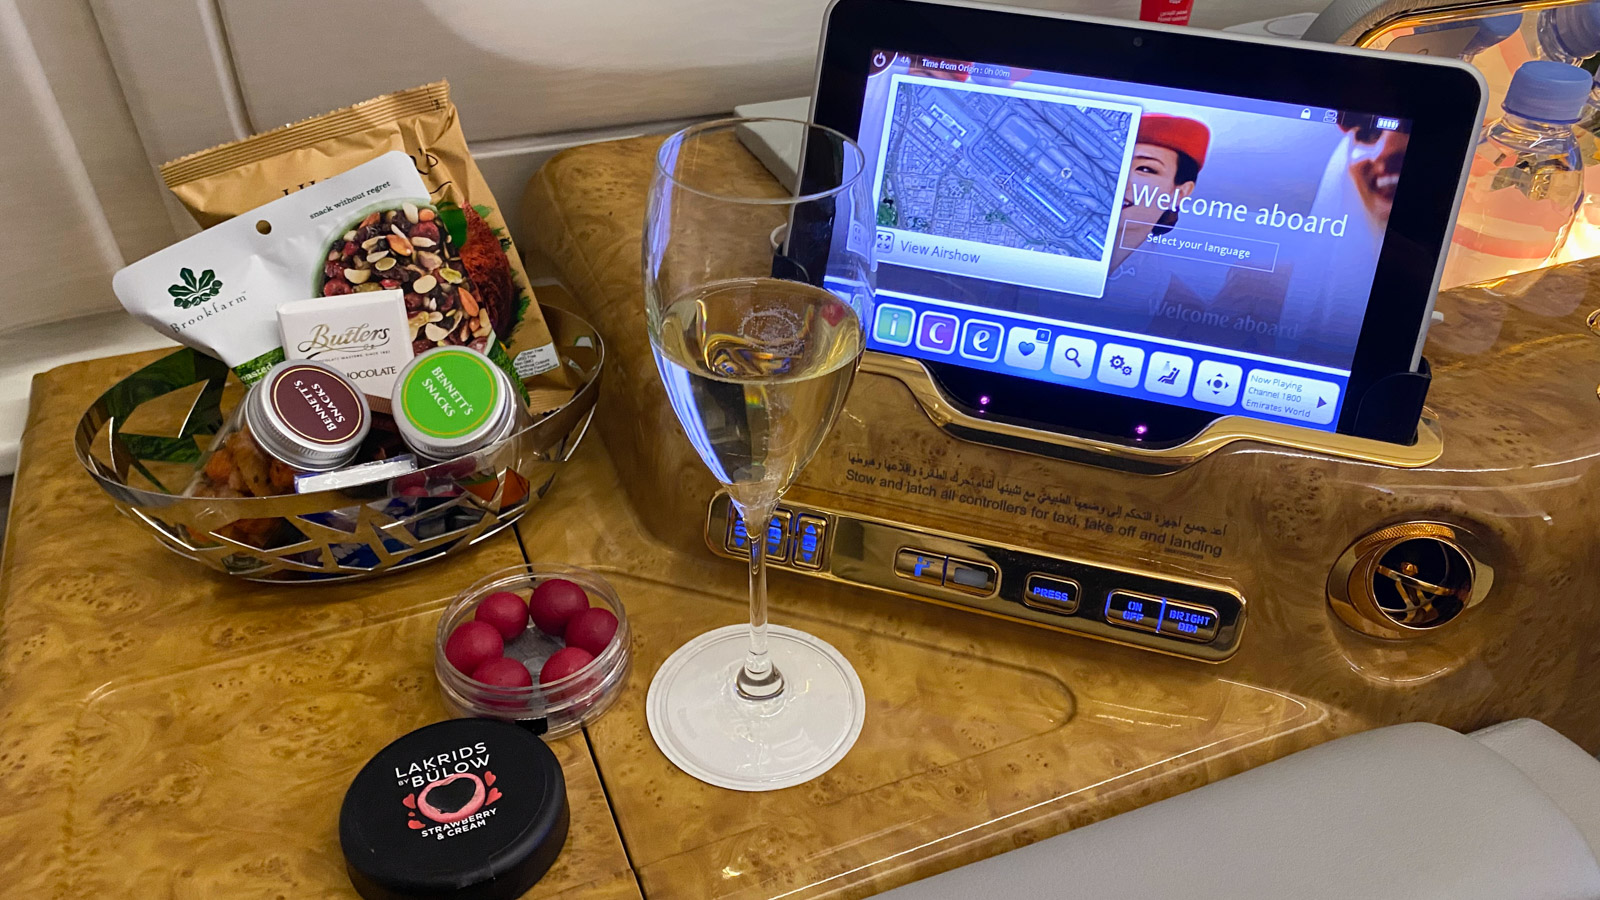 Emirates A380 First Class snacks